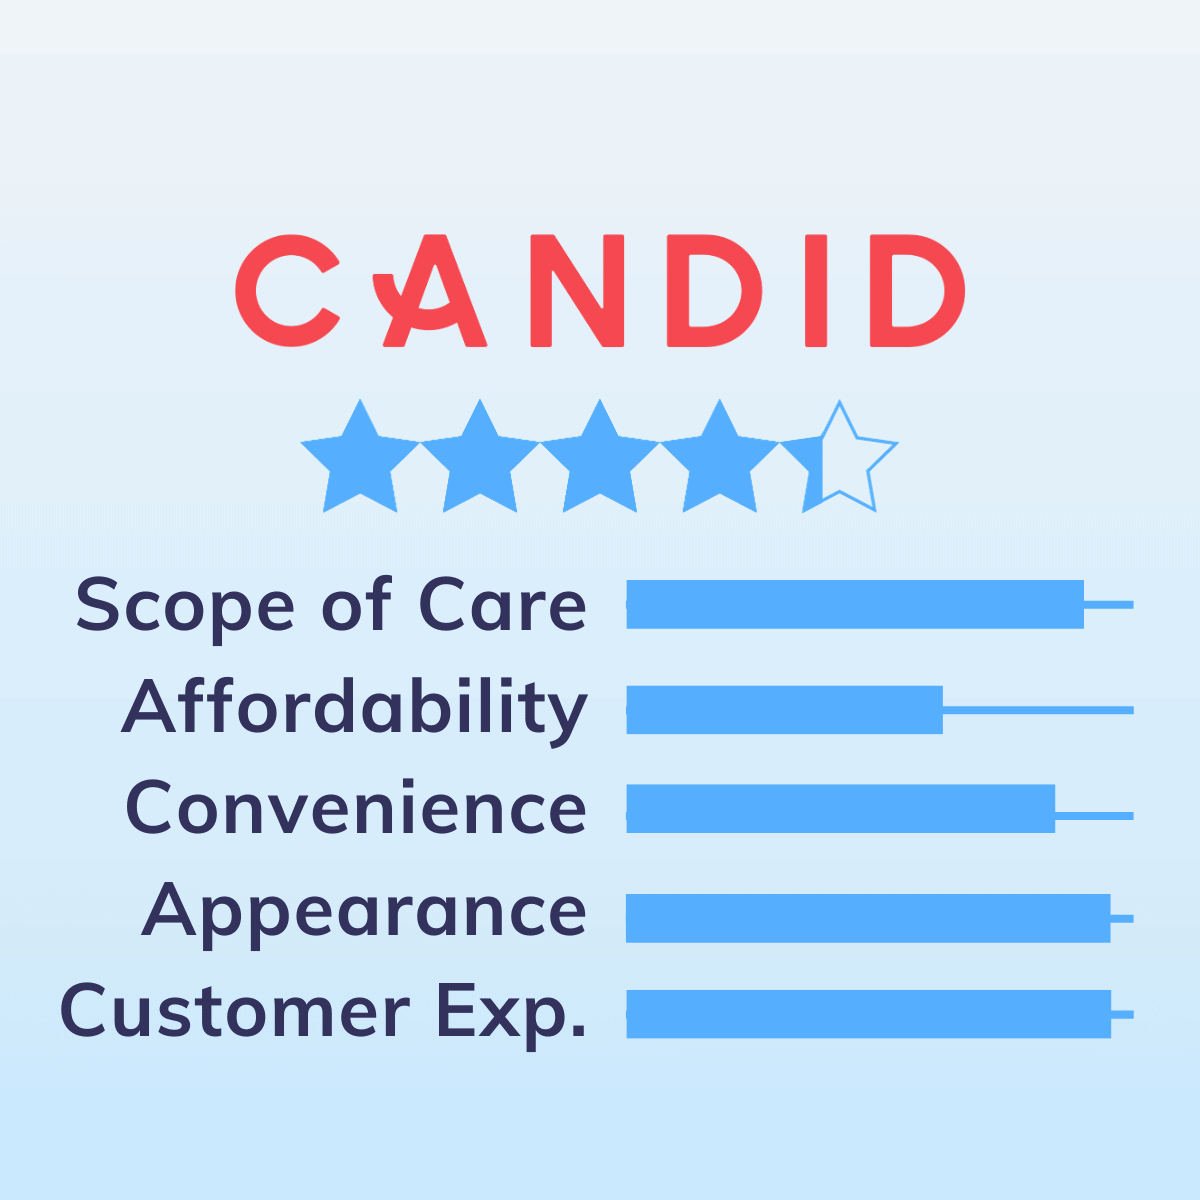 Candid Review Rankings